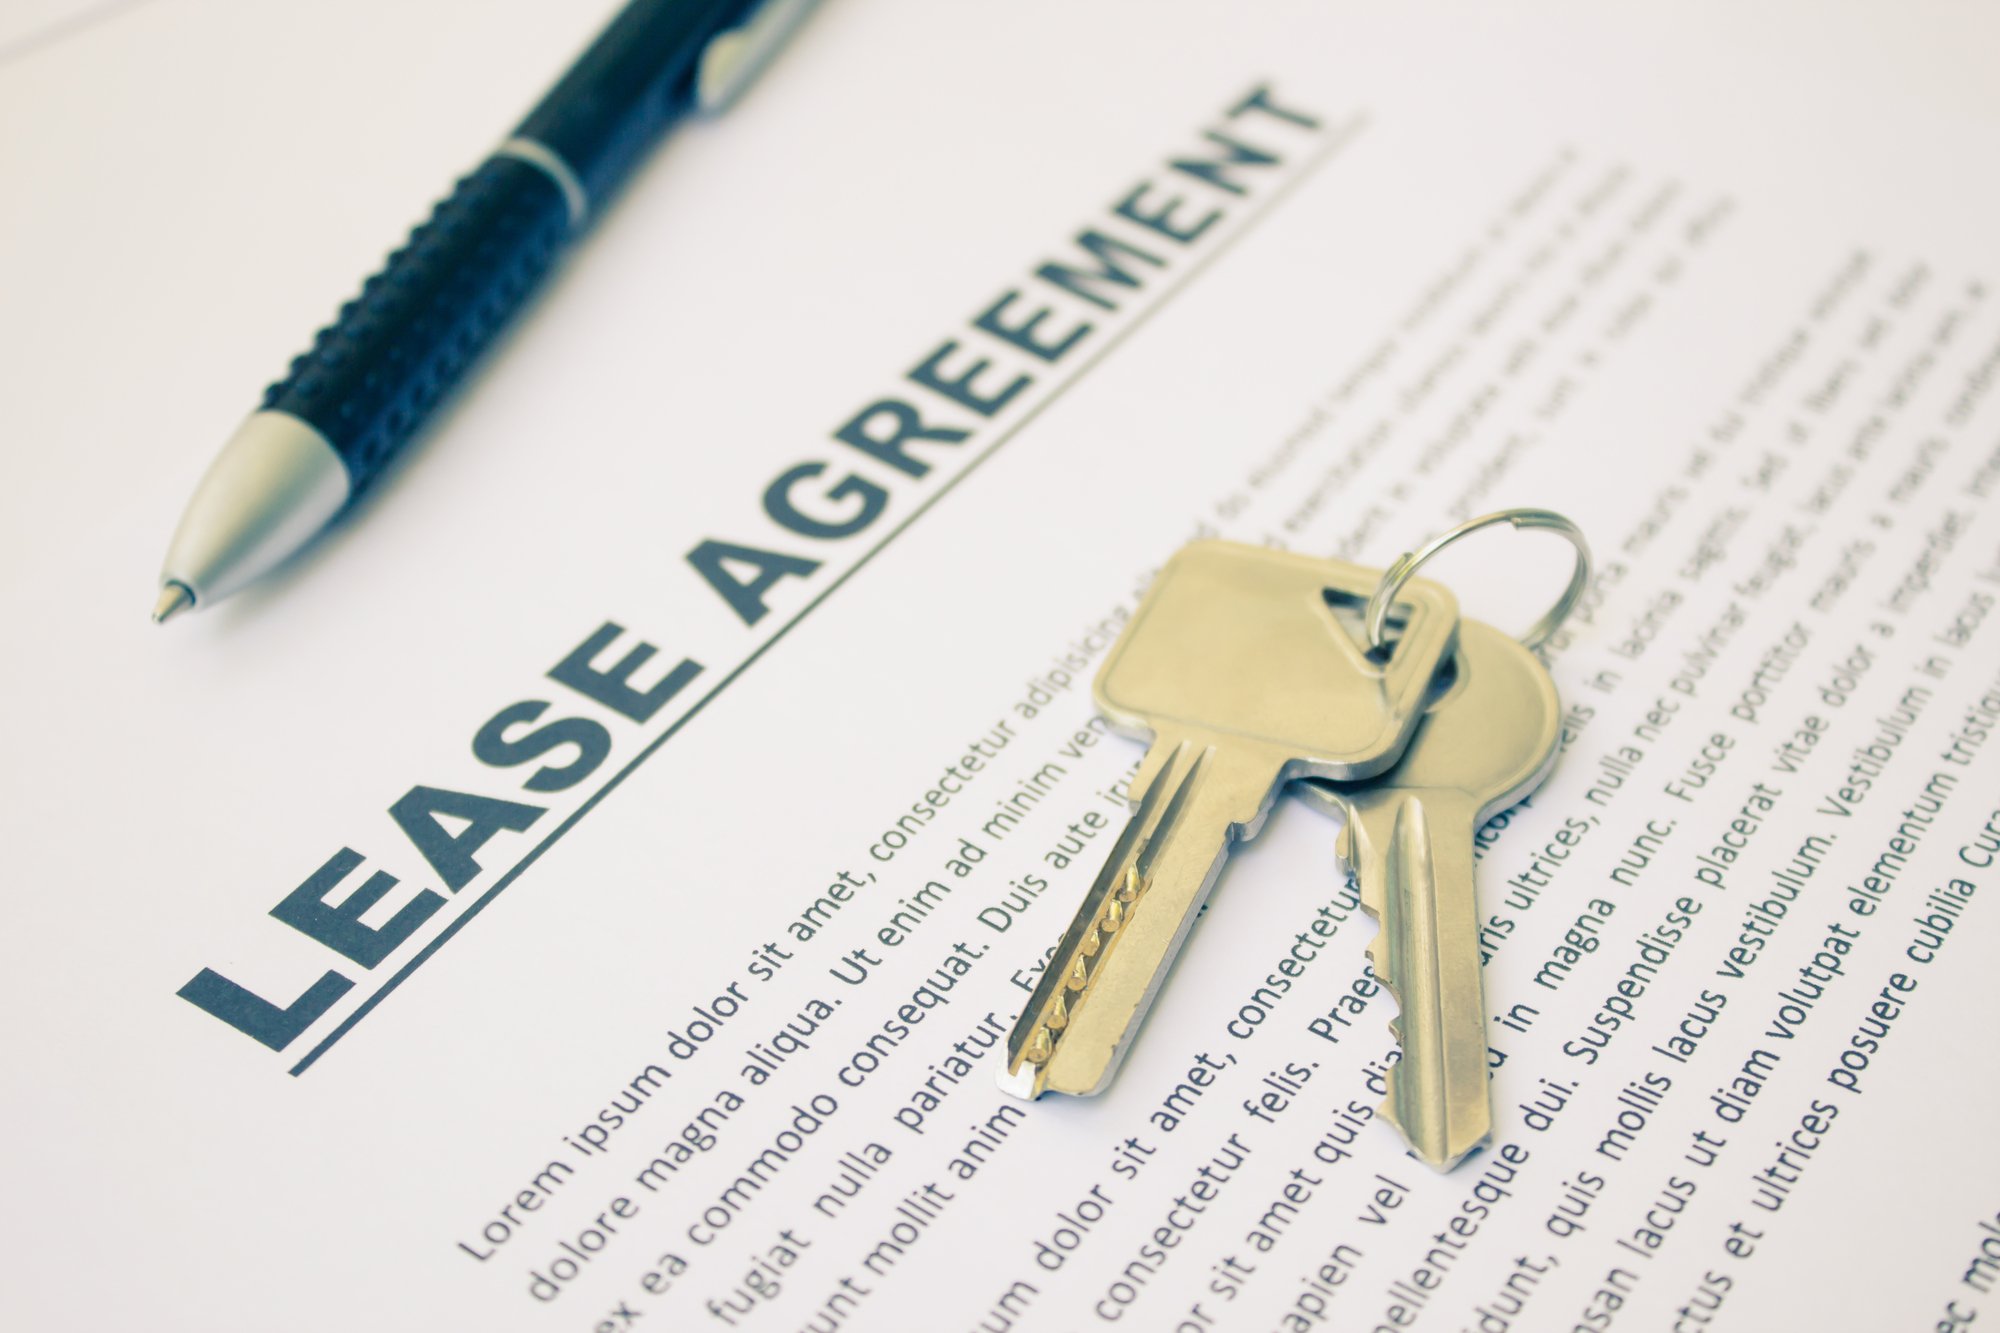 Lease Agreement,For Real Estate Concept Background